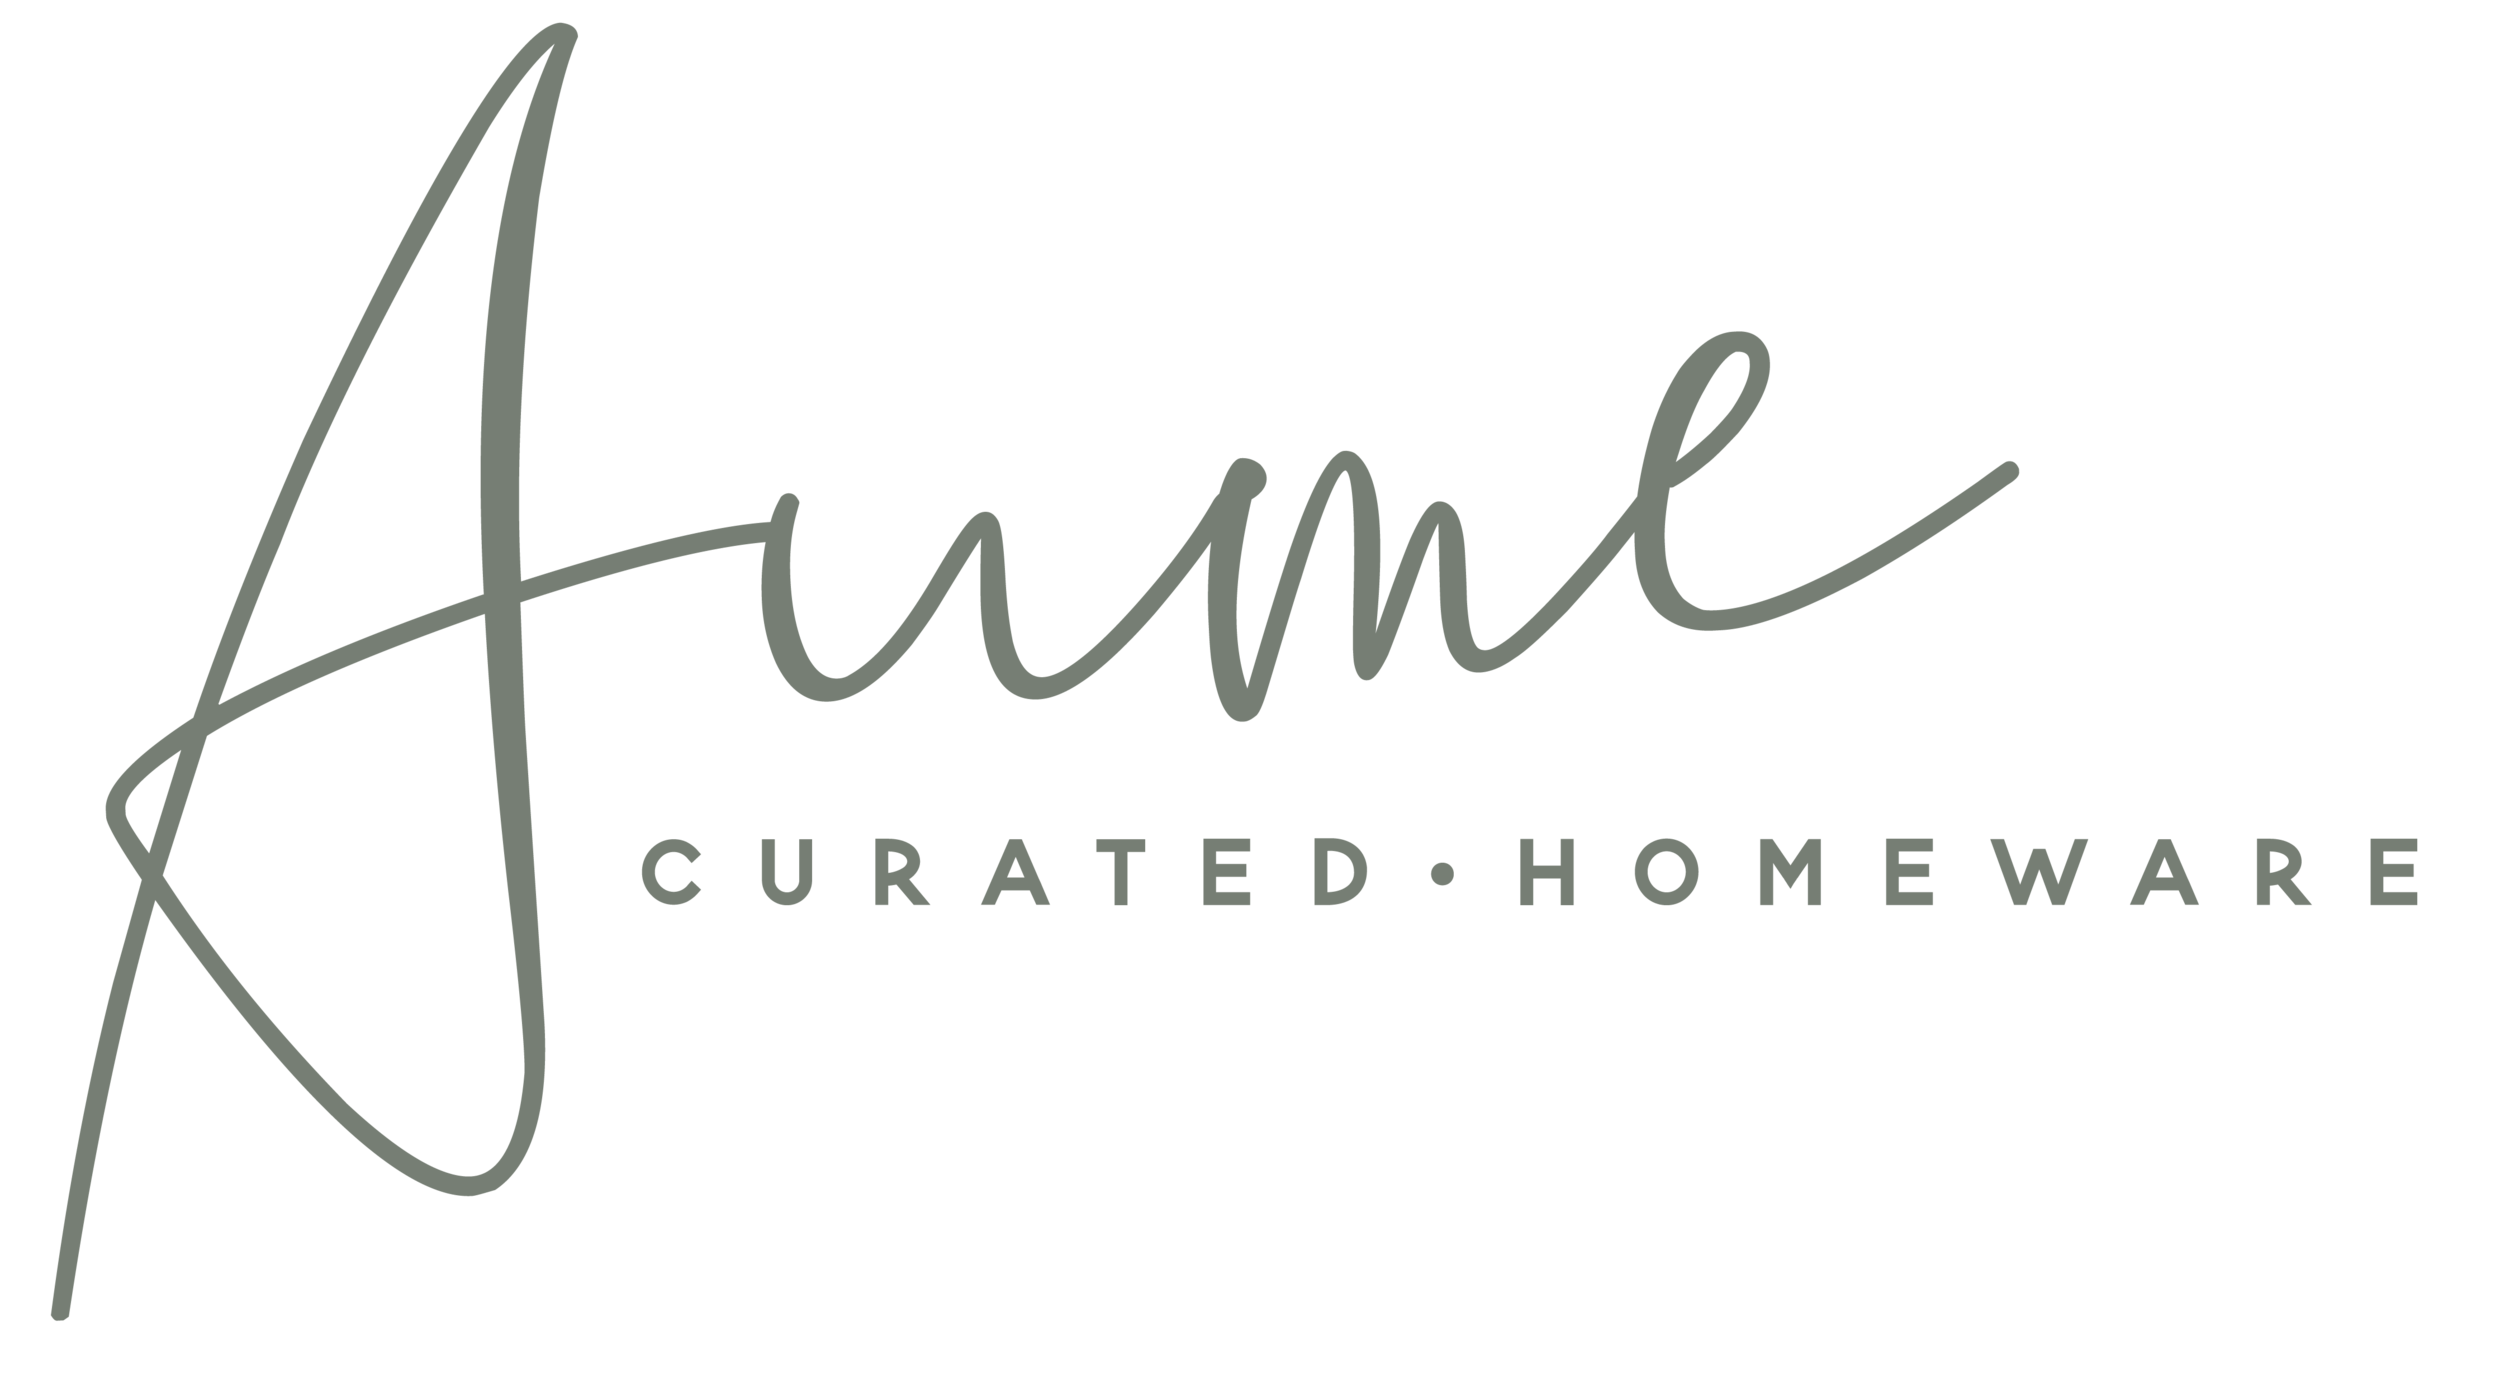 Aume Curated Homeware